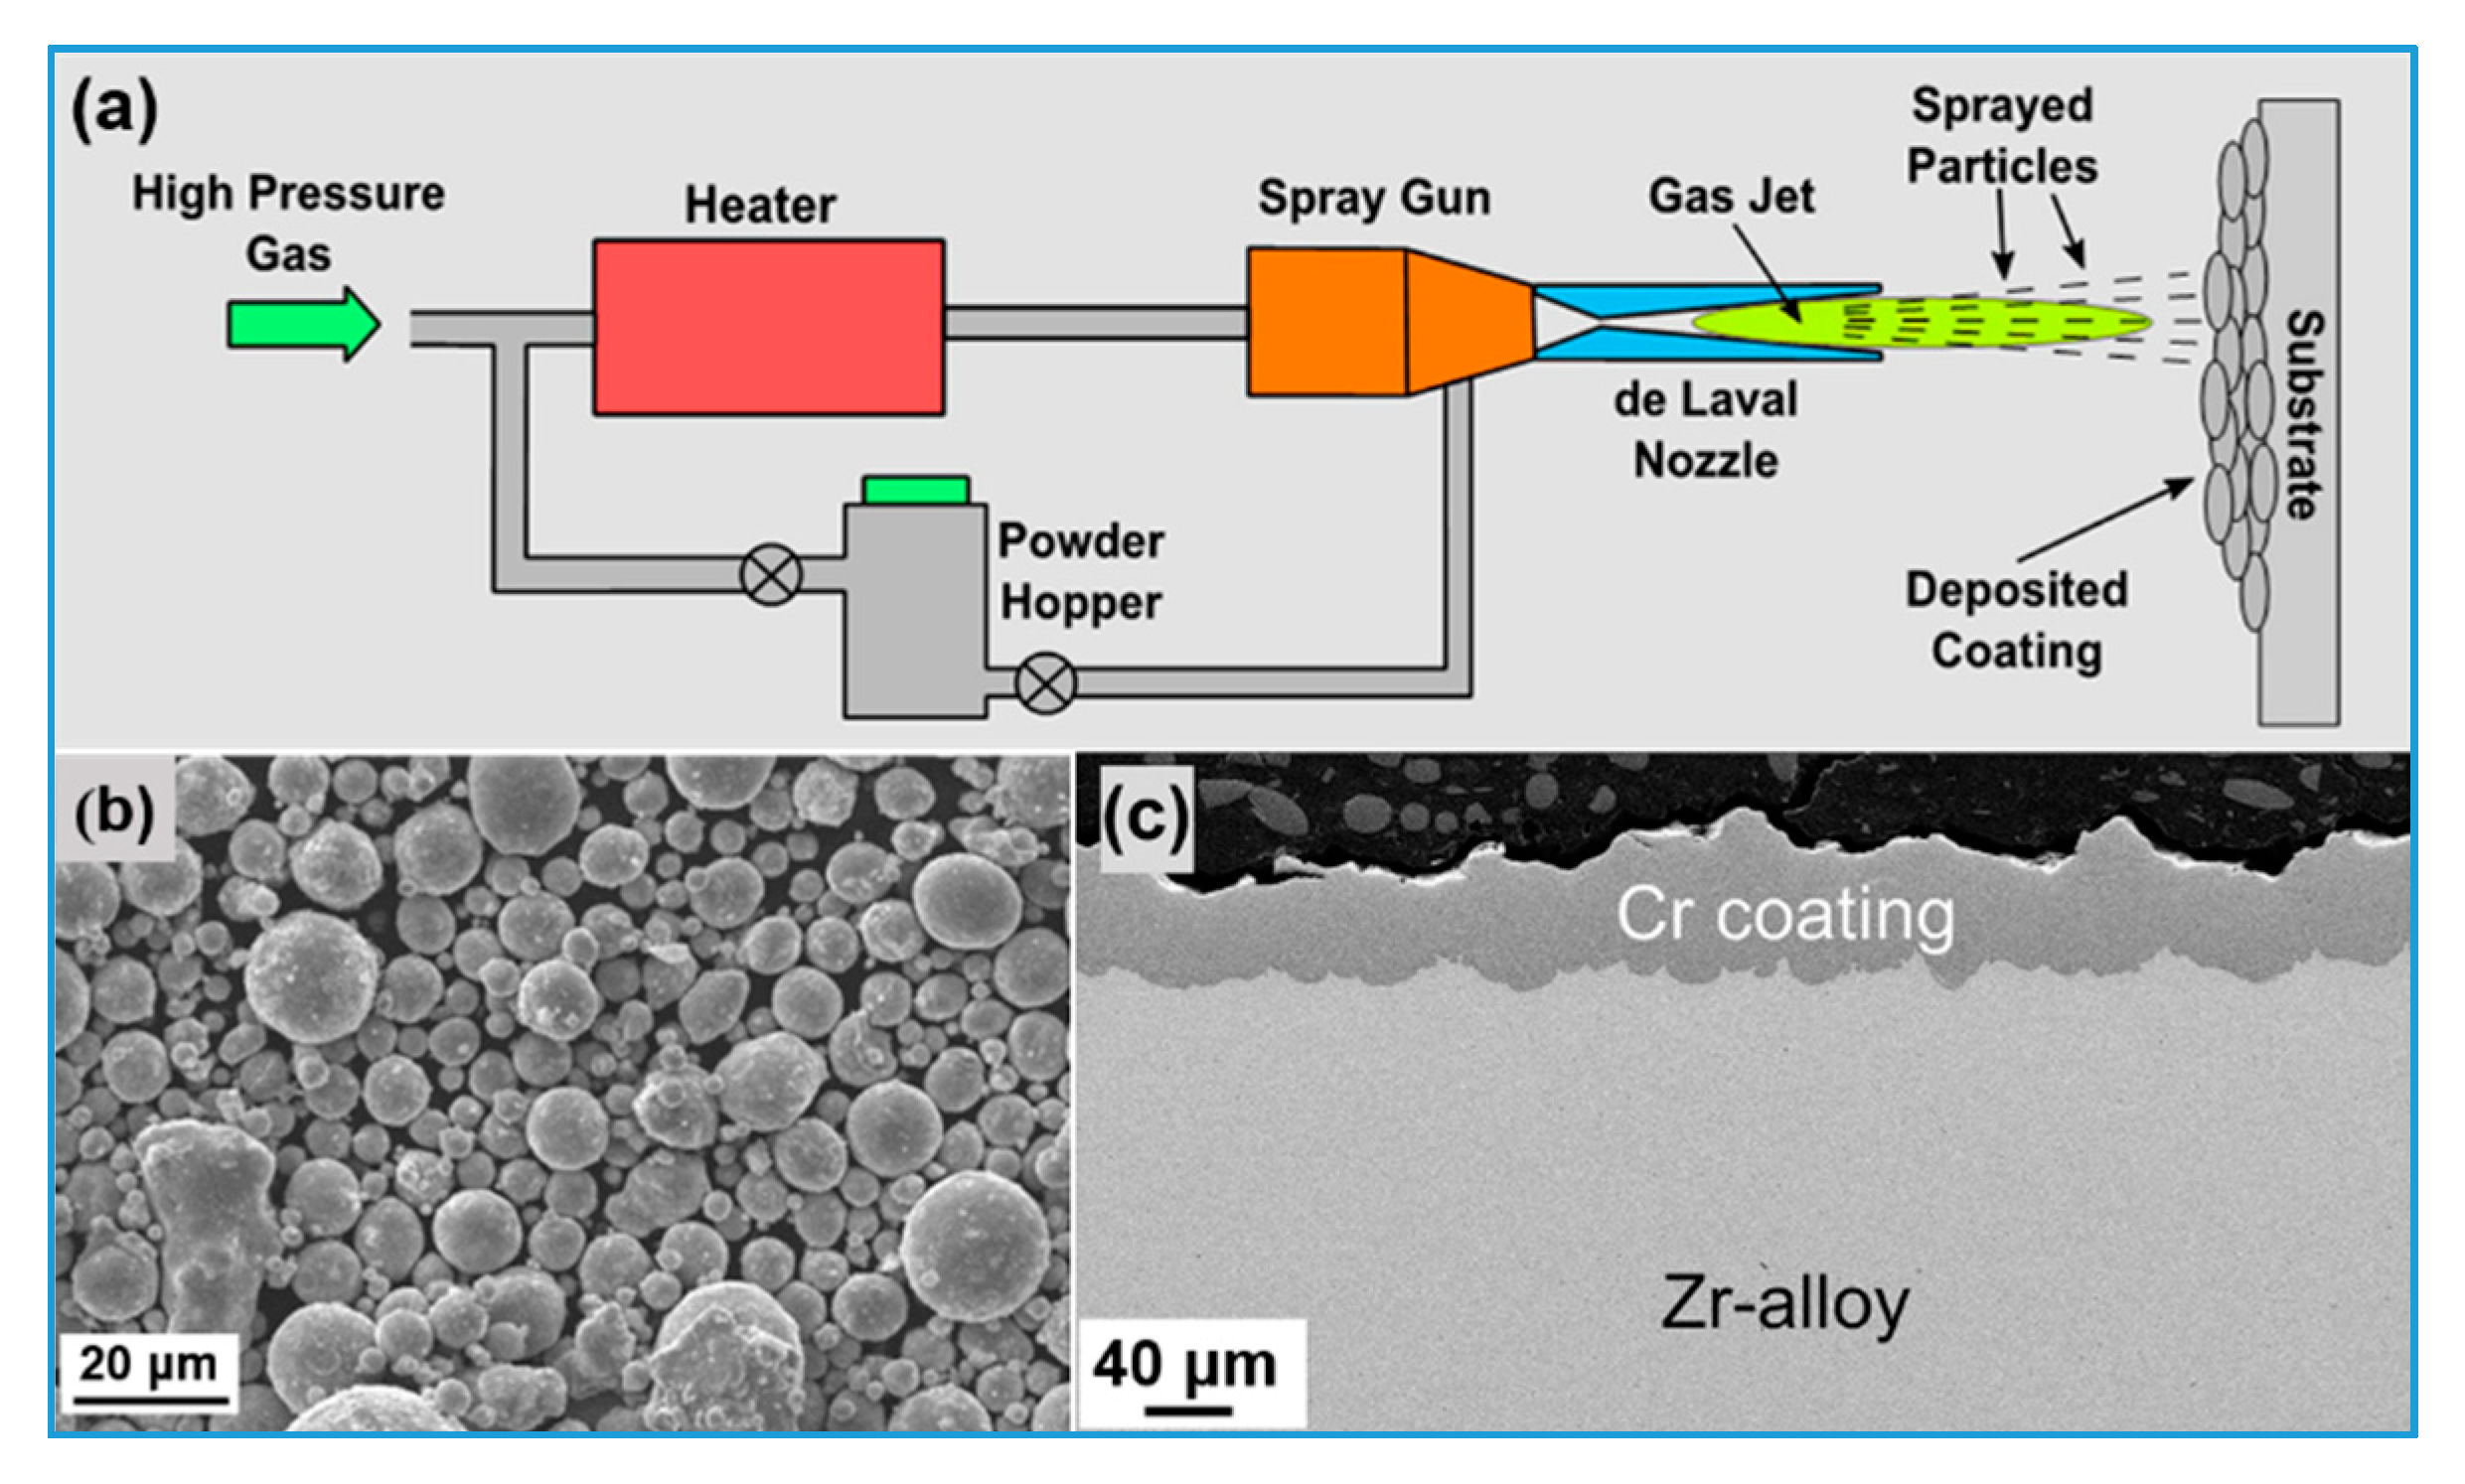 Coatings | Free Full-Text | Application and Development Progress of  Cr-Based Surface Coatings in Nuclear Fuel Element: I. Selection,  Preparation, and Characteristics of Coating Materials